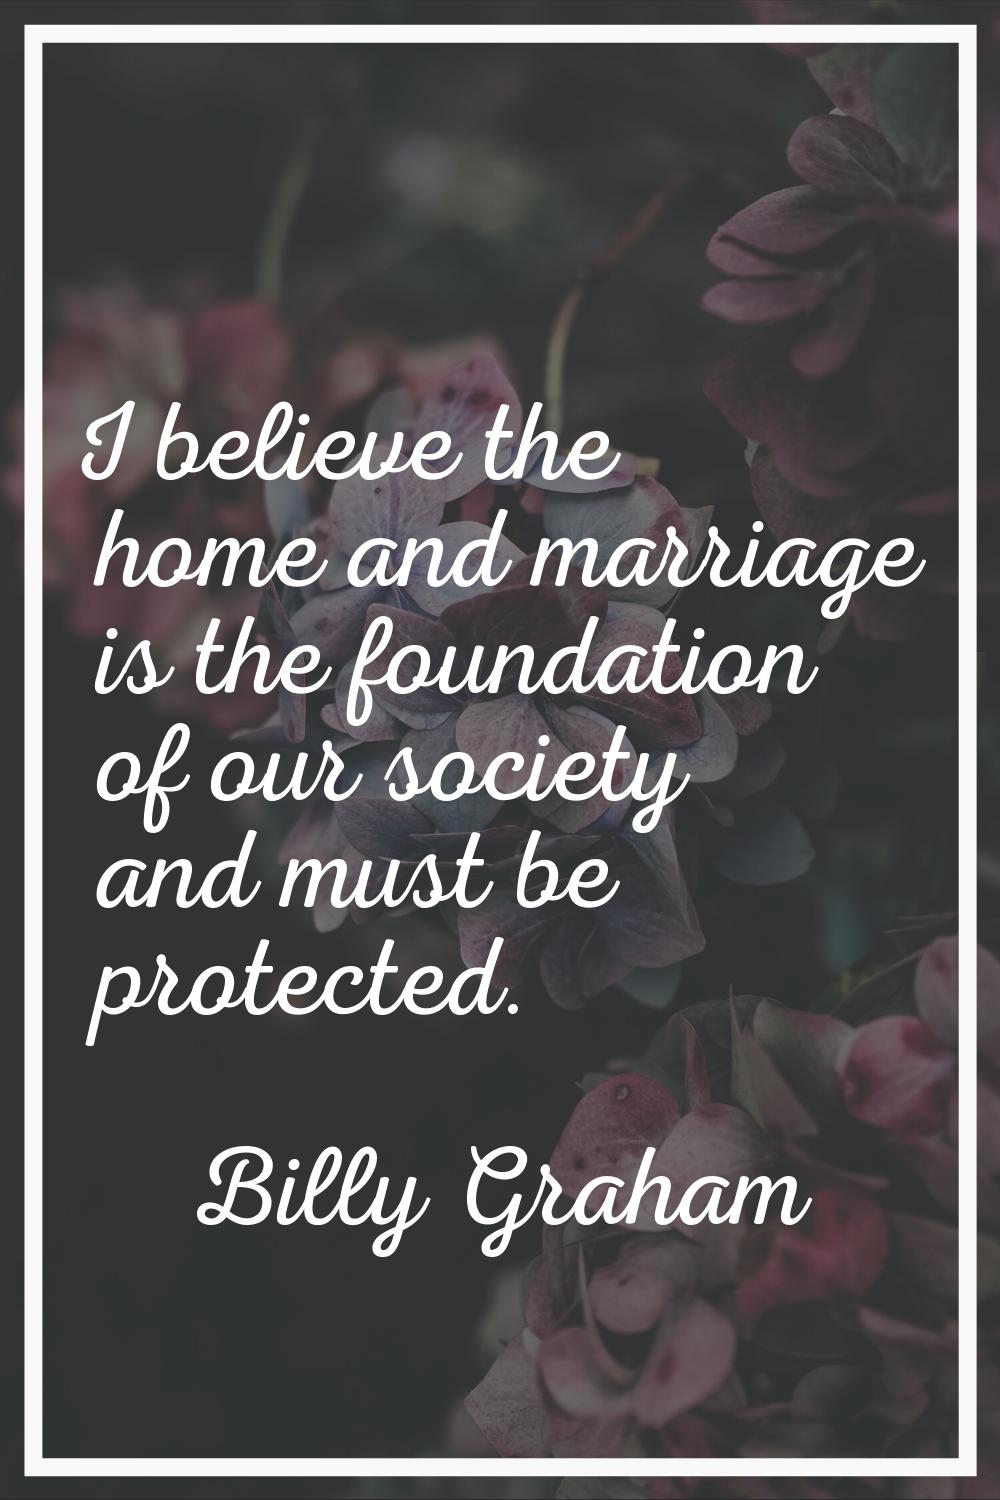 I believe the home and marriage is the foundation of our society and must be protected.